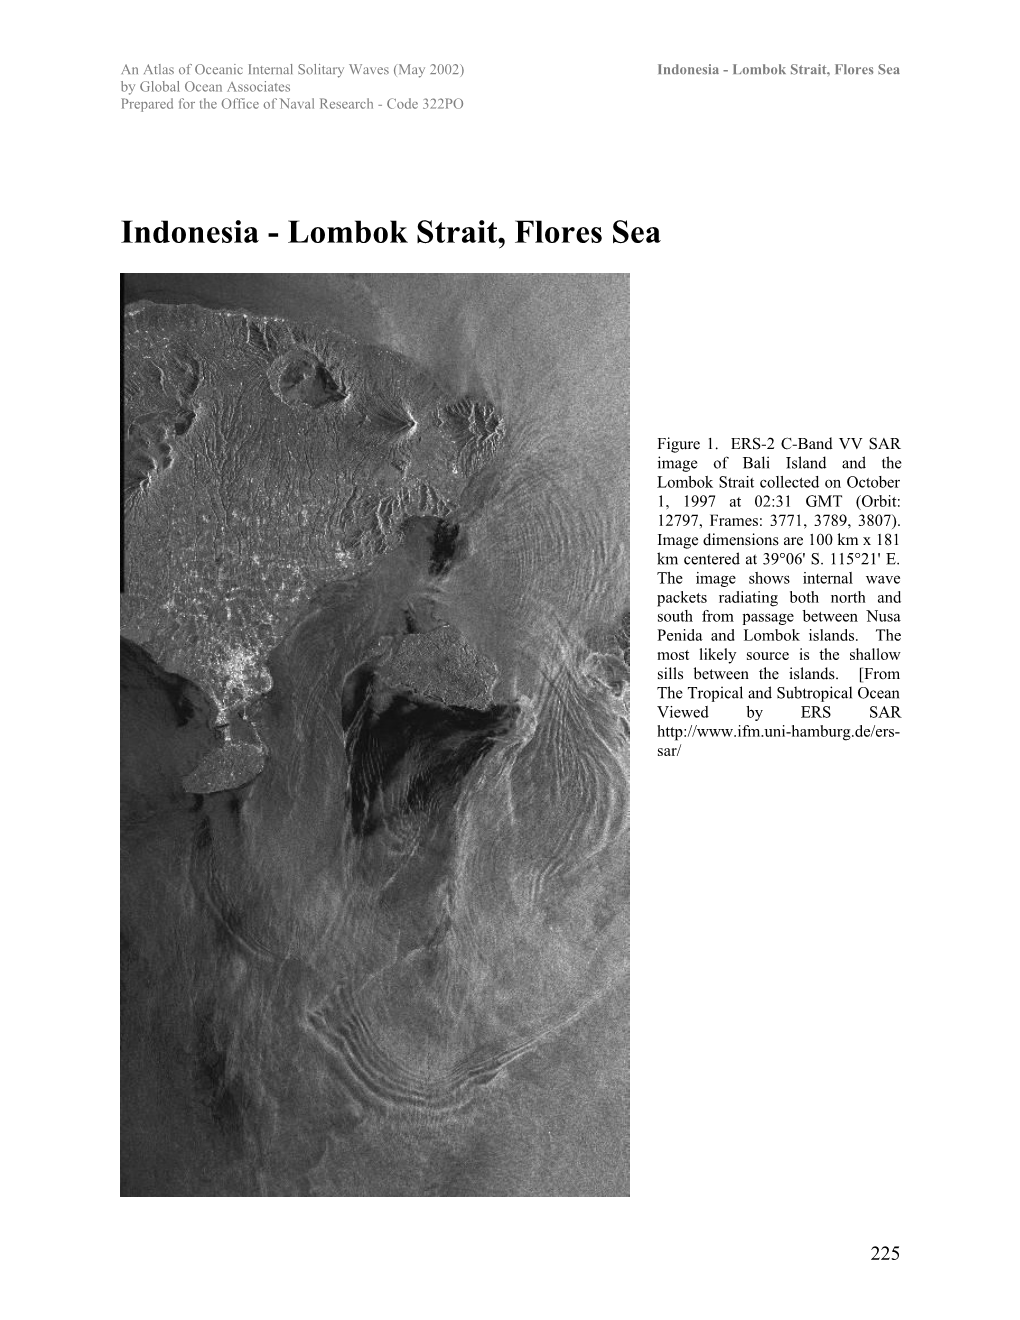 Indonesia - Lombok Strait, Flores Sea by Global Ocean Associates Prepared for the Office of Naval Research - Code 322PO